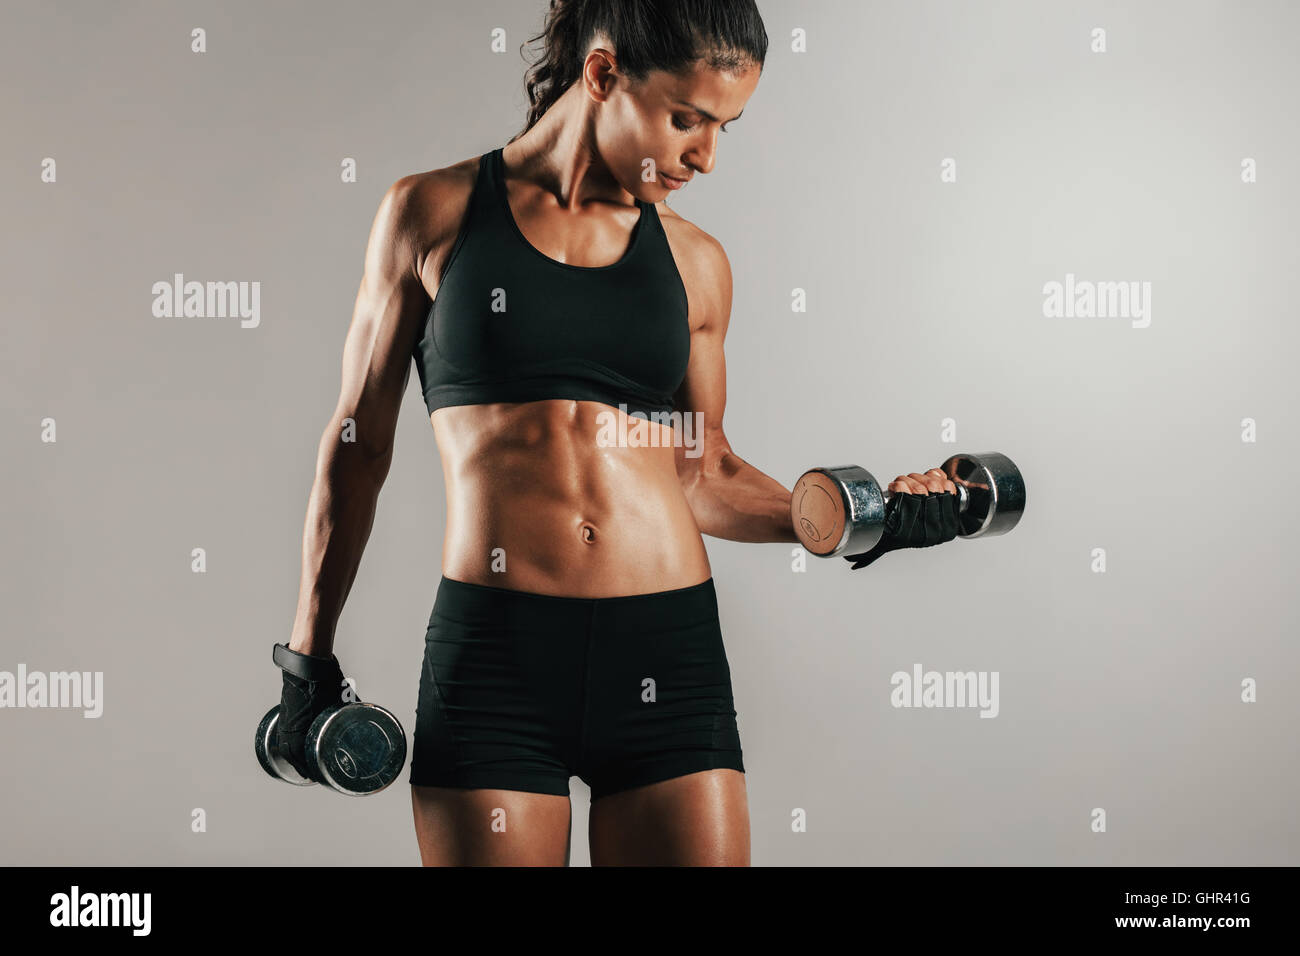 Girl in Black Dress Lifting Weights Stock Photo - Image of beautiful,  female: 94870062